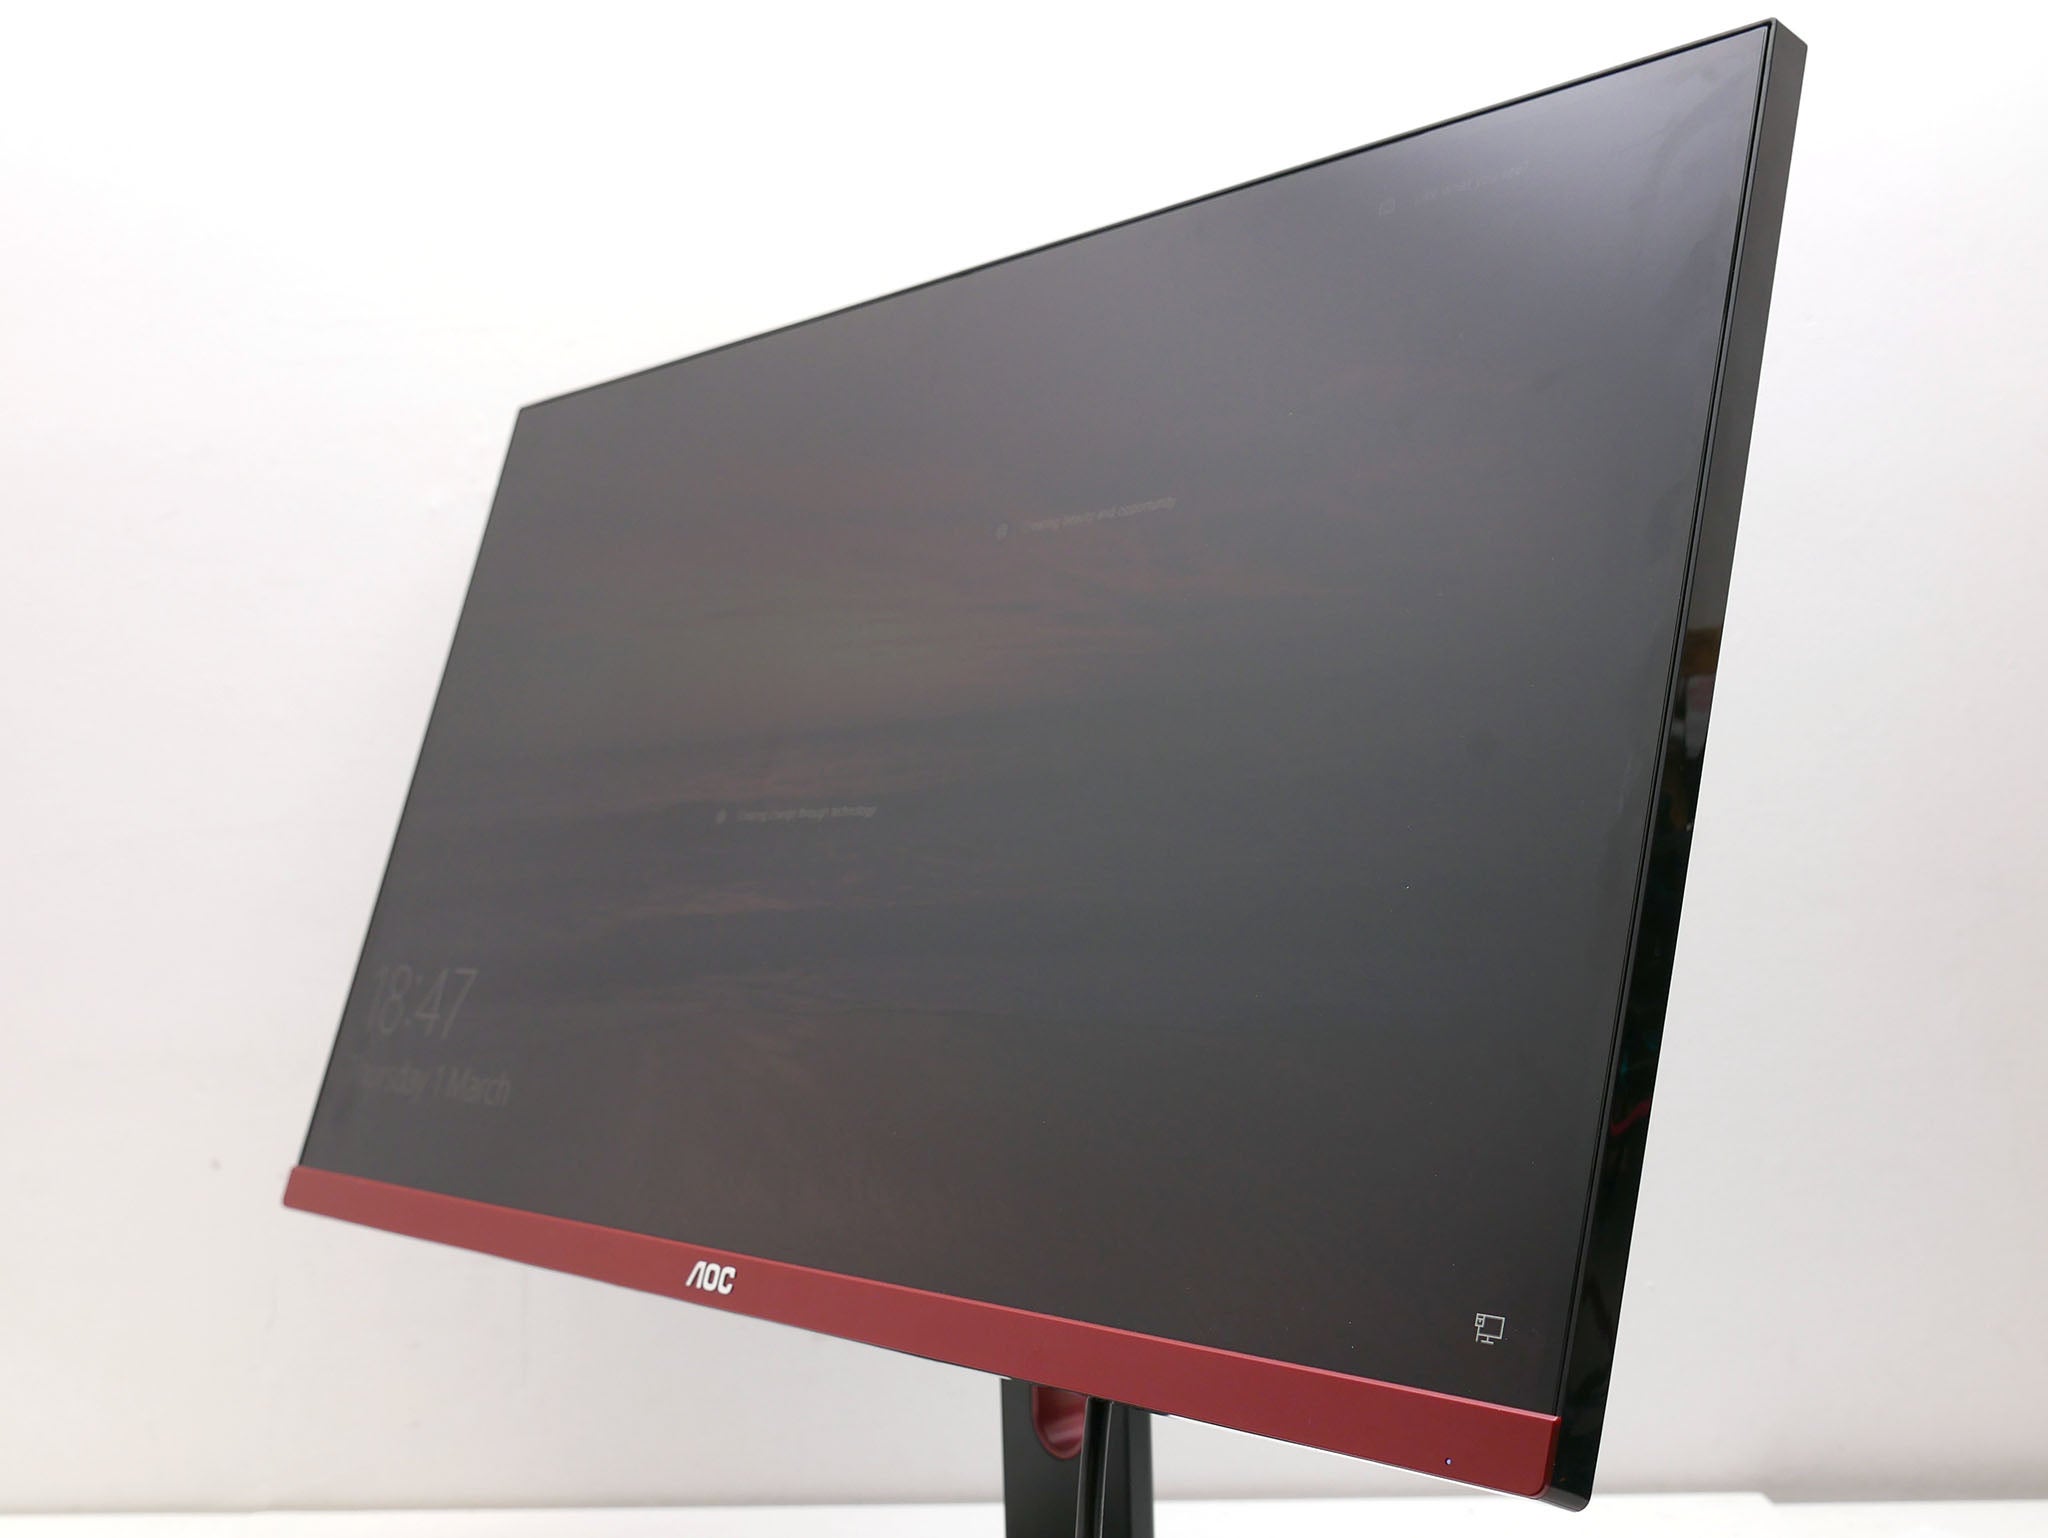 AOC G2790PX gaming monitor on display with screen off.